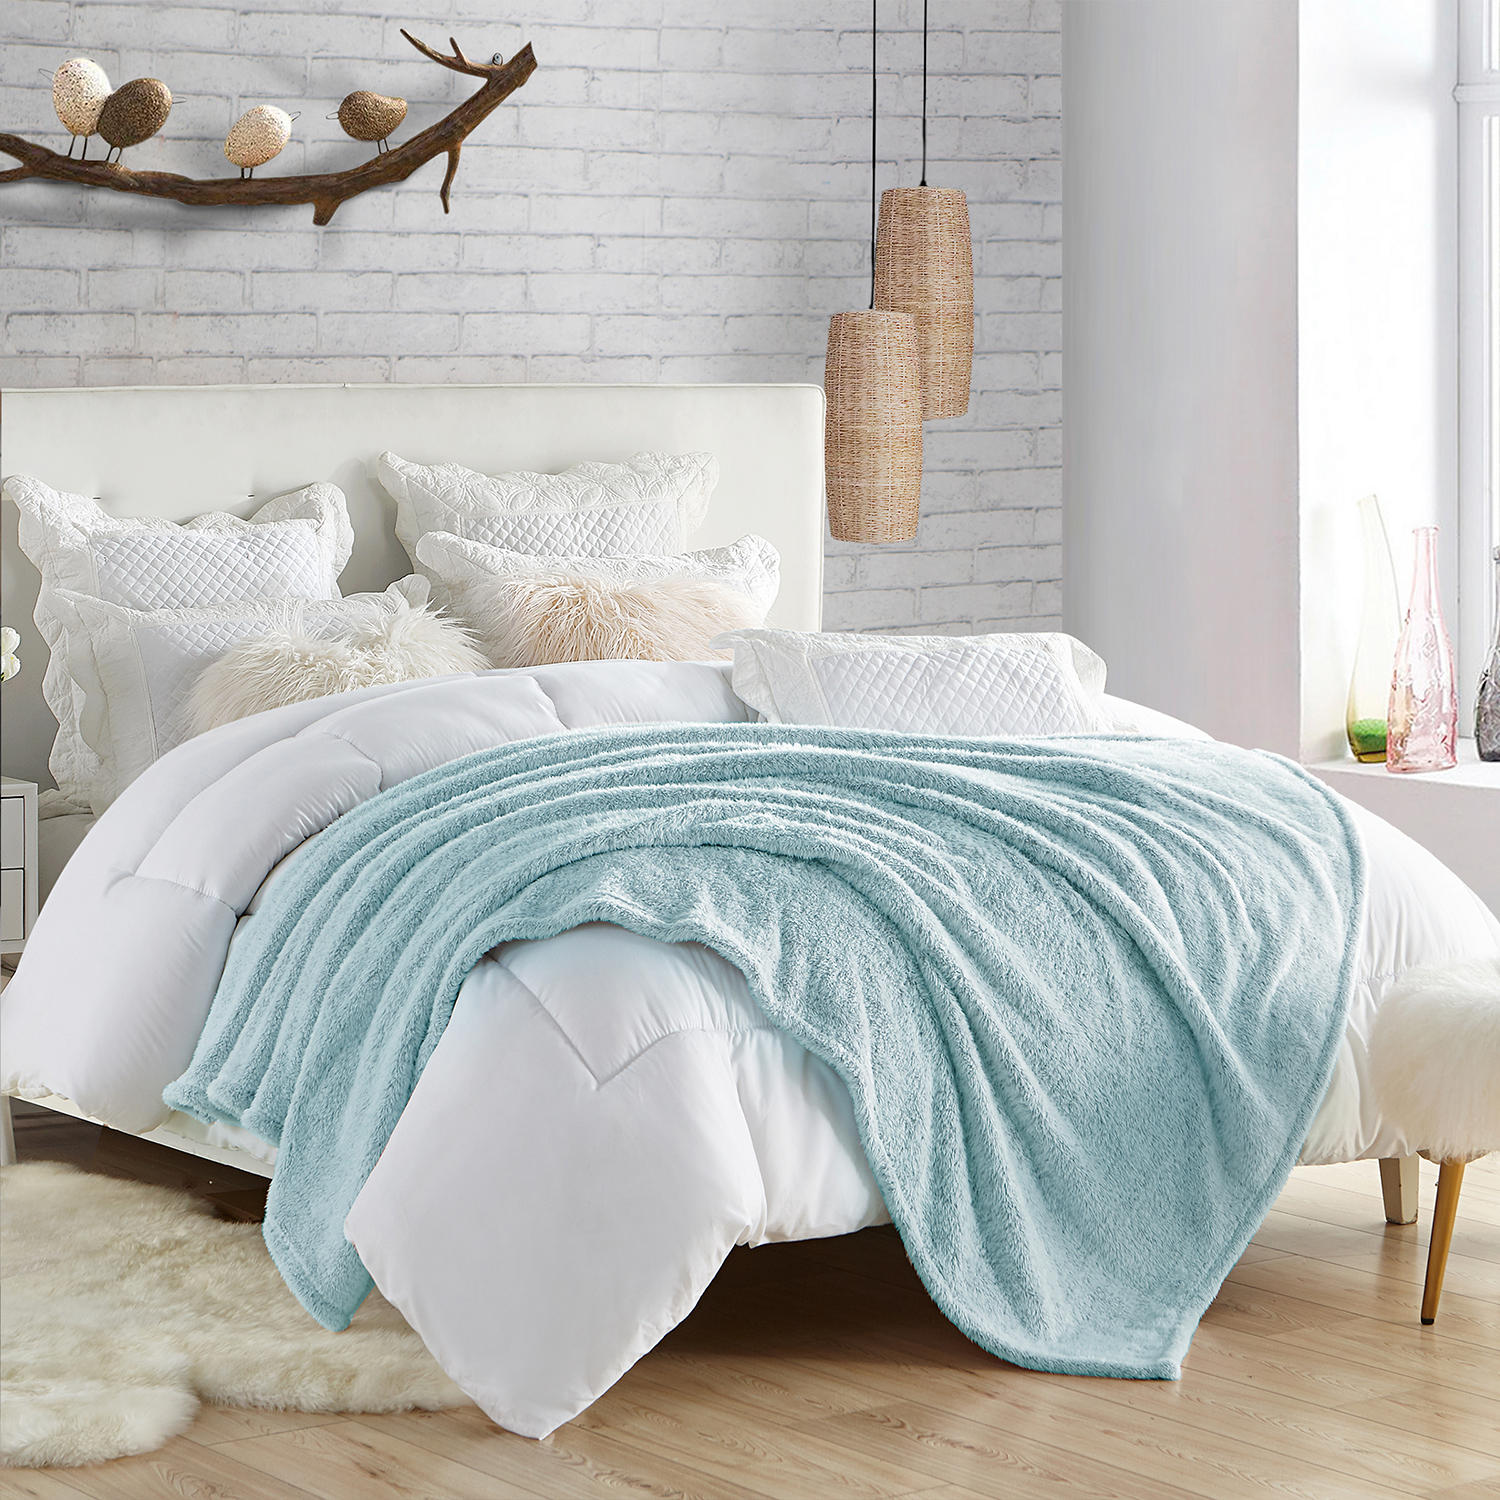 Swift Home Oversized 60″ x 70″ Extra-Fluffy High Pile Cotton Candy Soft Faux Fur Throw Blanket